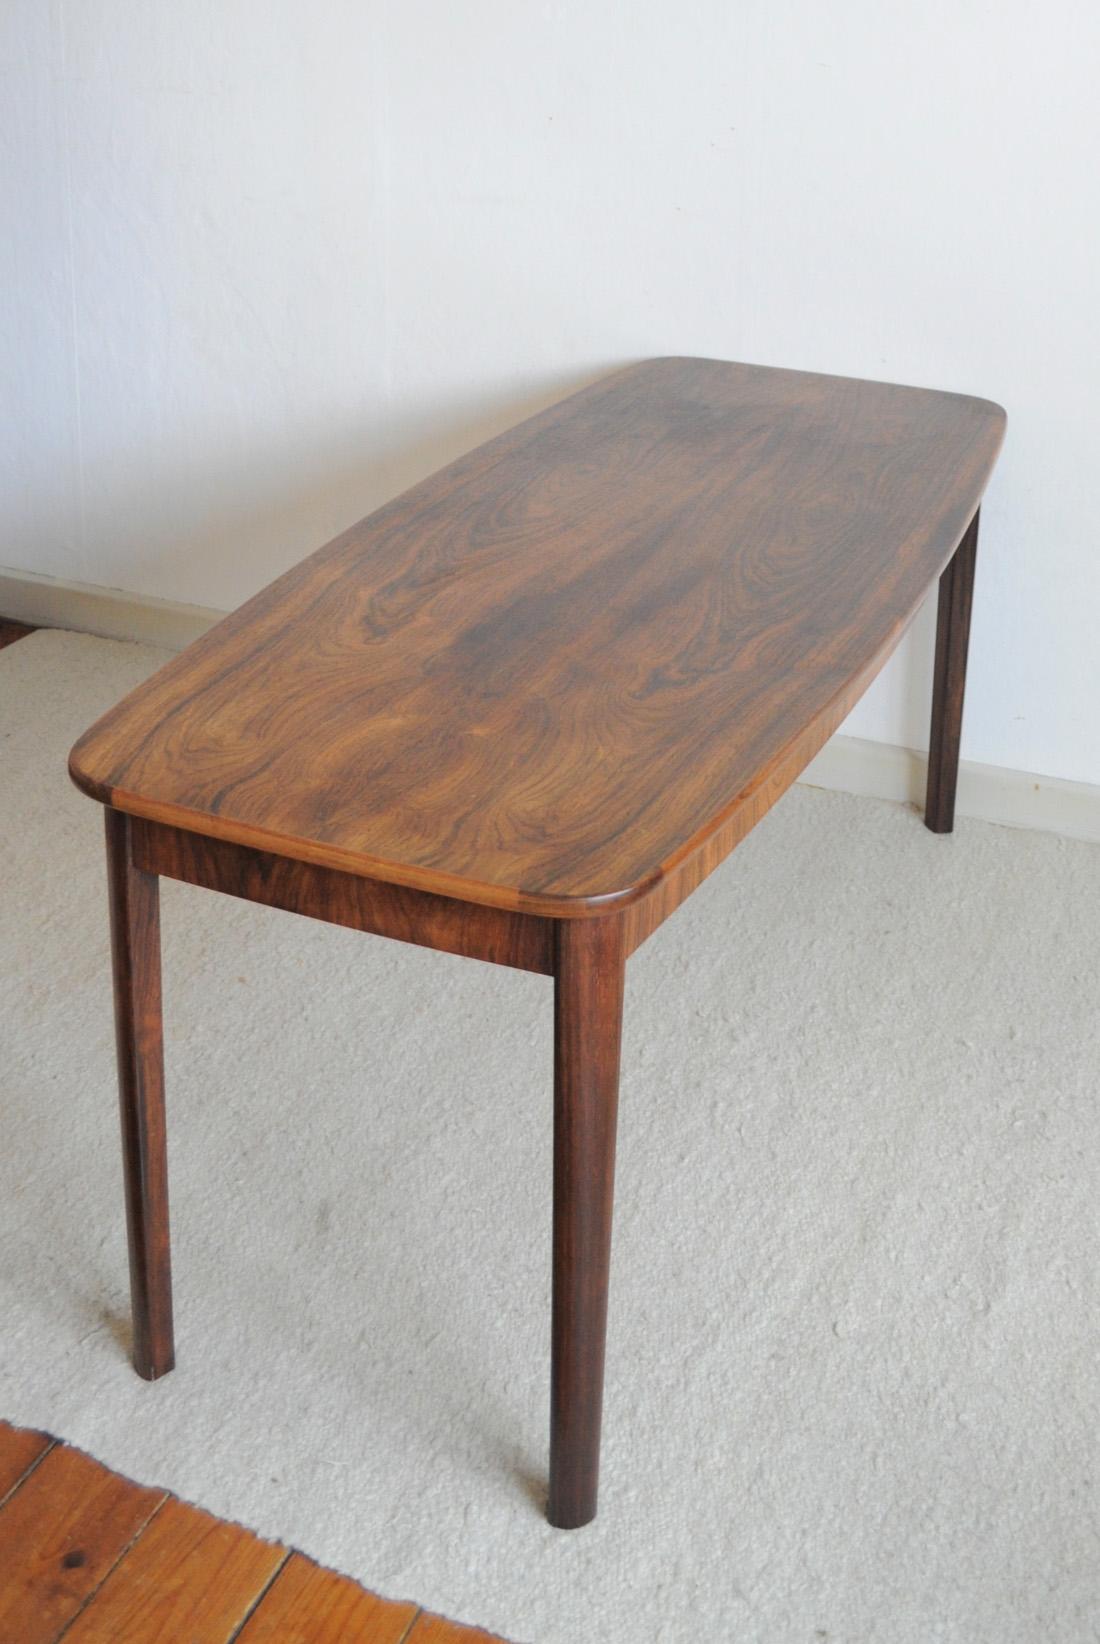 Rosewood veneer and solid side table, excellent craftsmanship. 
Good vintage condition, signs of wear consistent with age and use.

Dimensions (W x D x H): 129.5 x 57/47 x 57.5 cm.